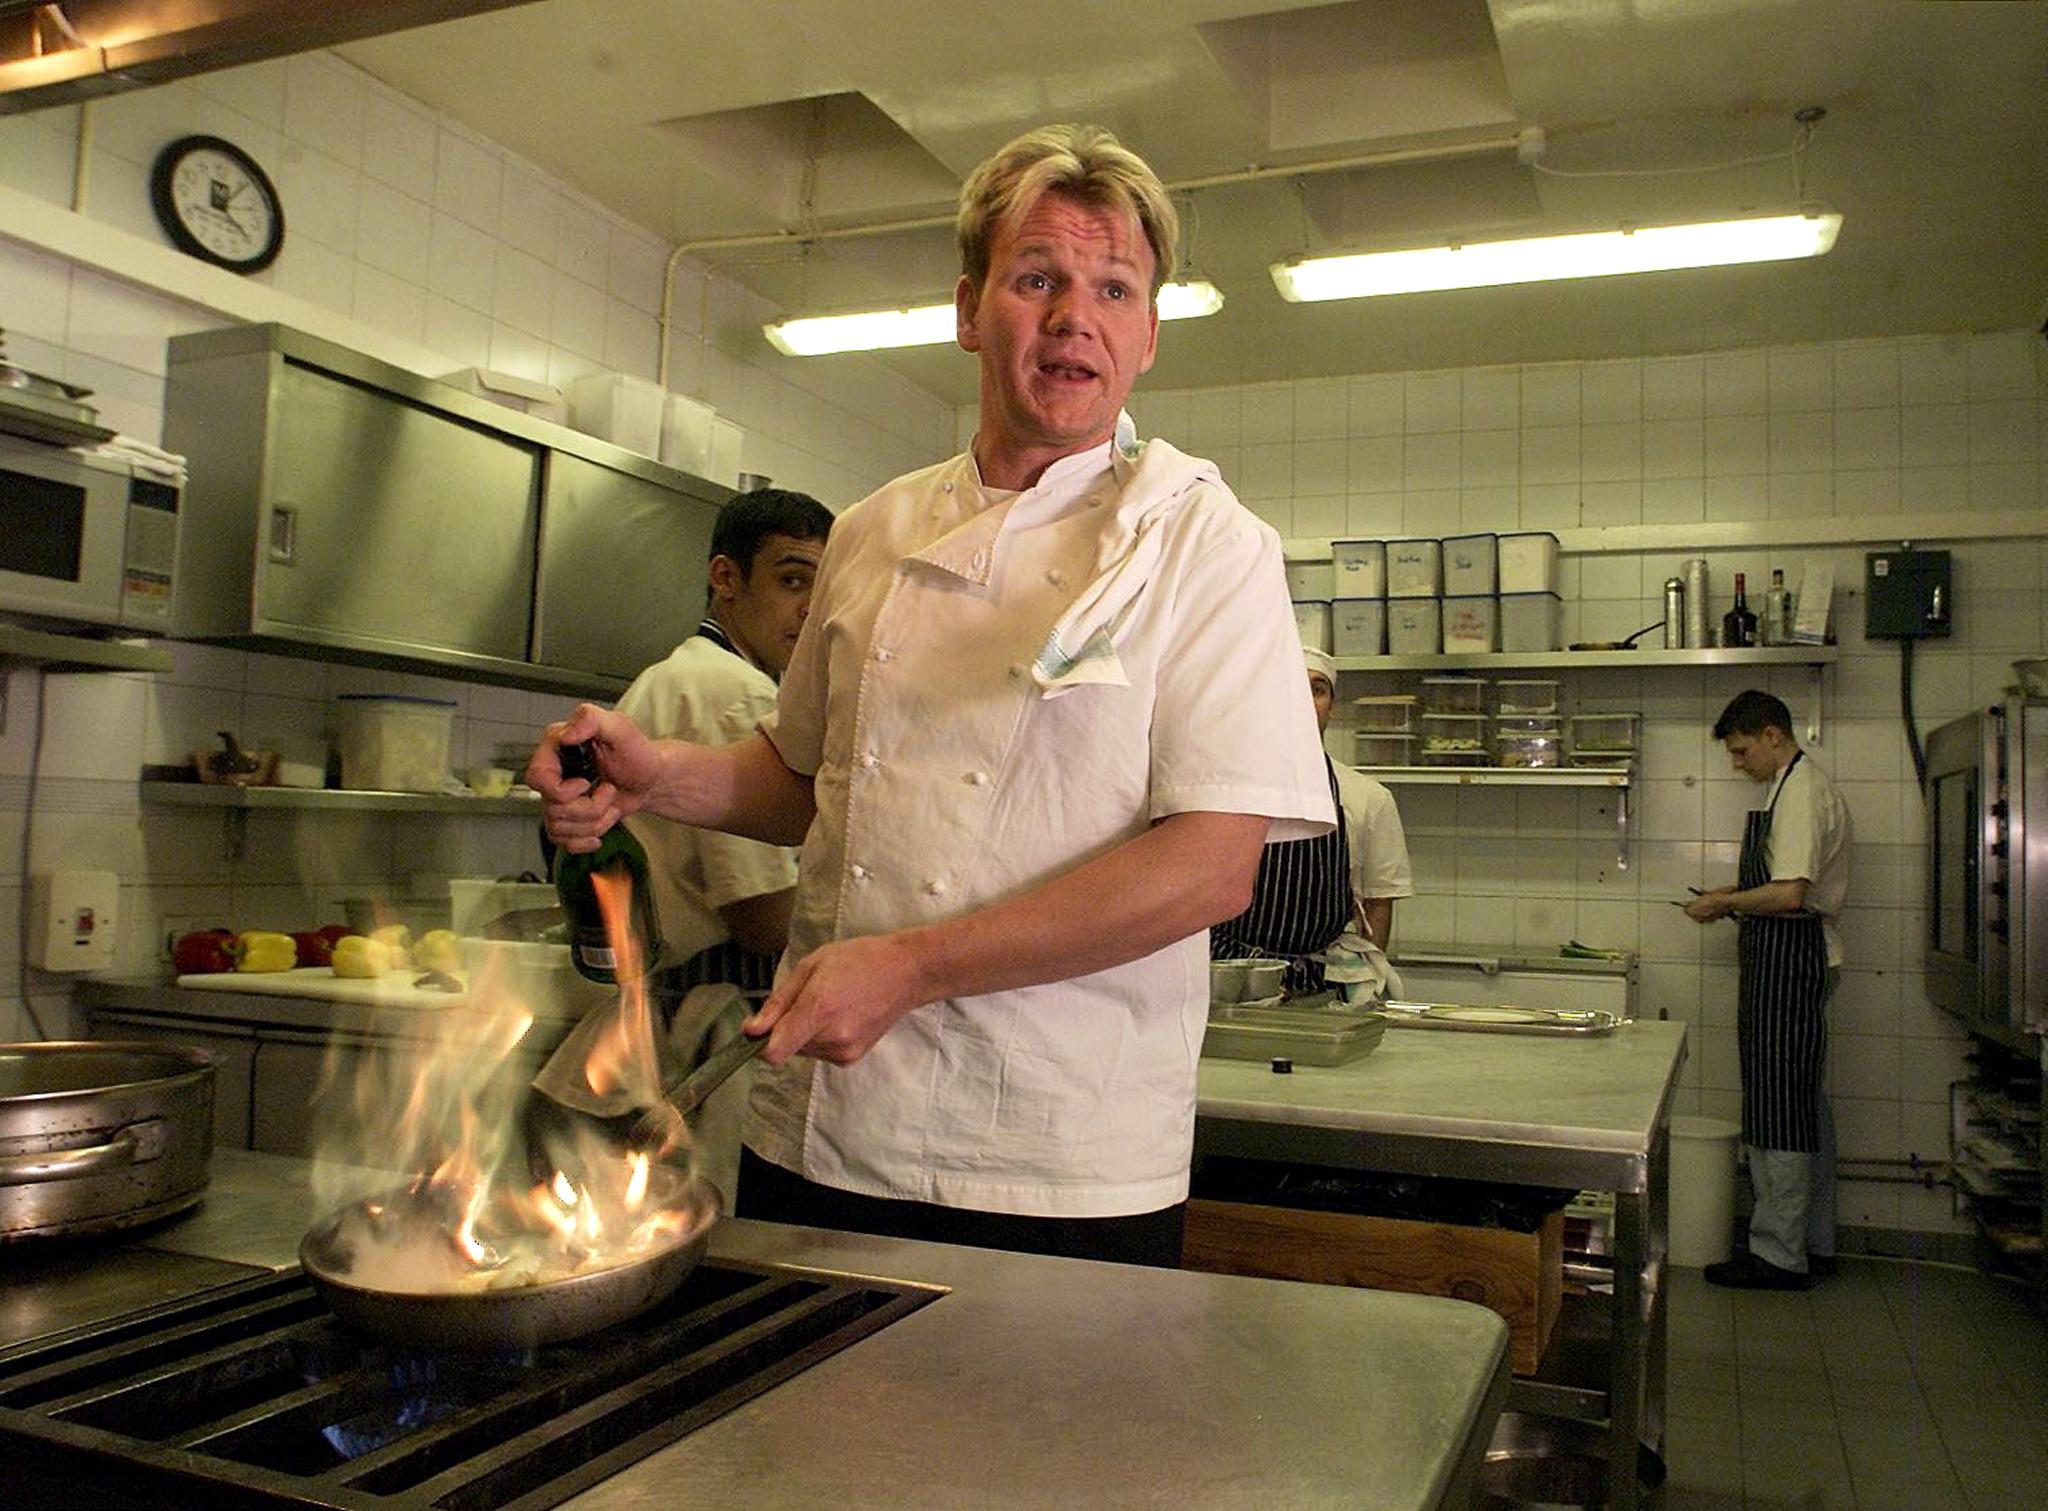 British Chef Gordon Ramsay inside the kitchen of his Chelsea restaurant on 19 January 2001, after being awarded three Michelin stars